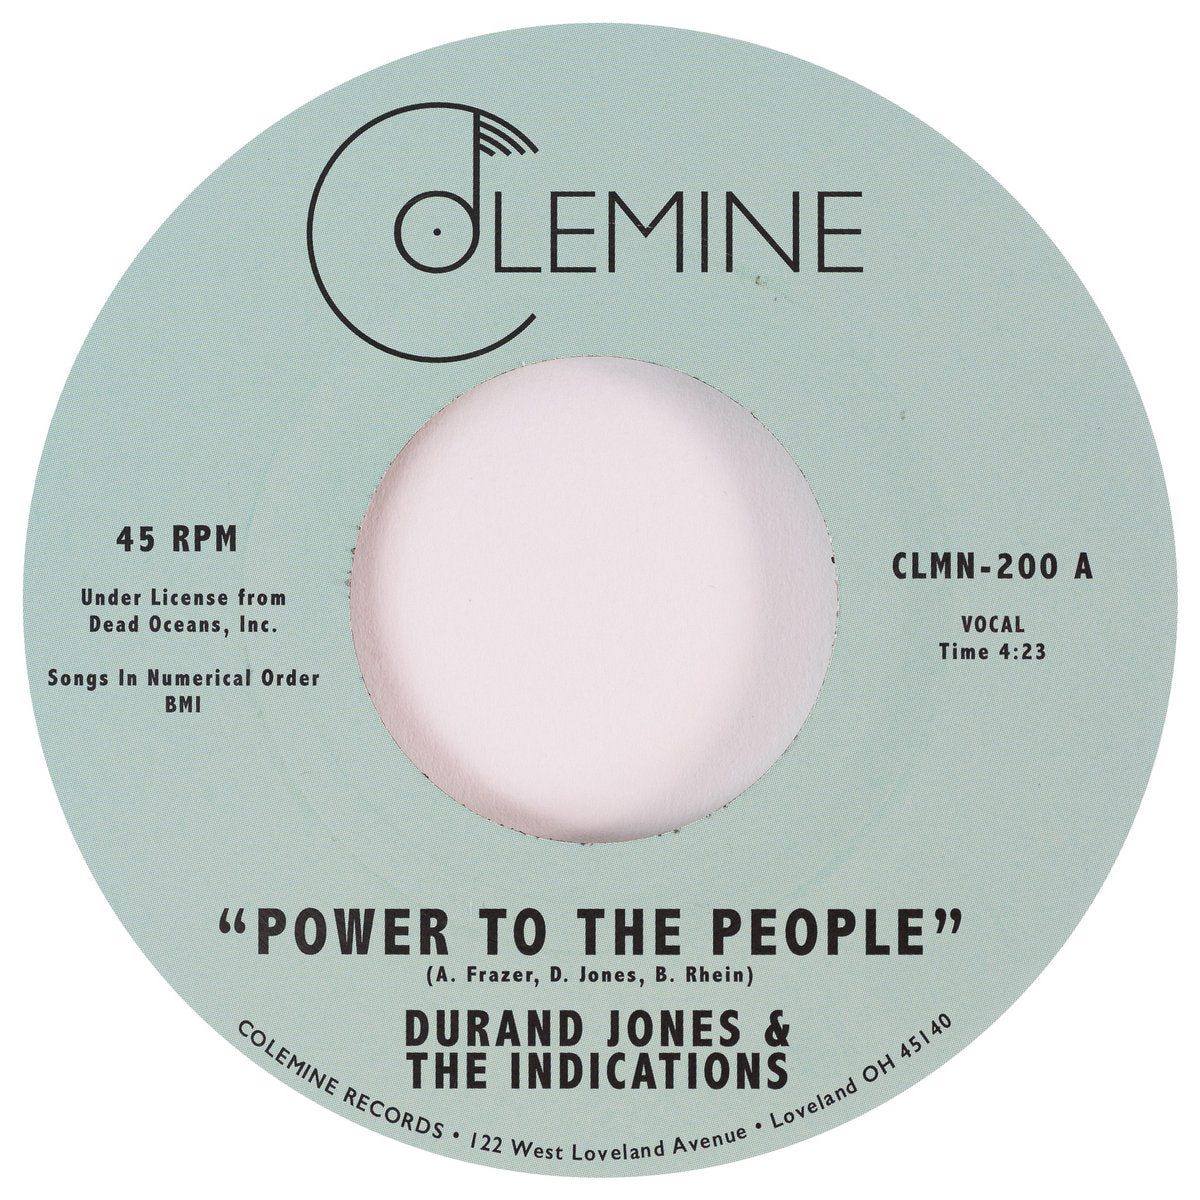 Durand Jones & the Indications - Power to the People (7" Single)